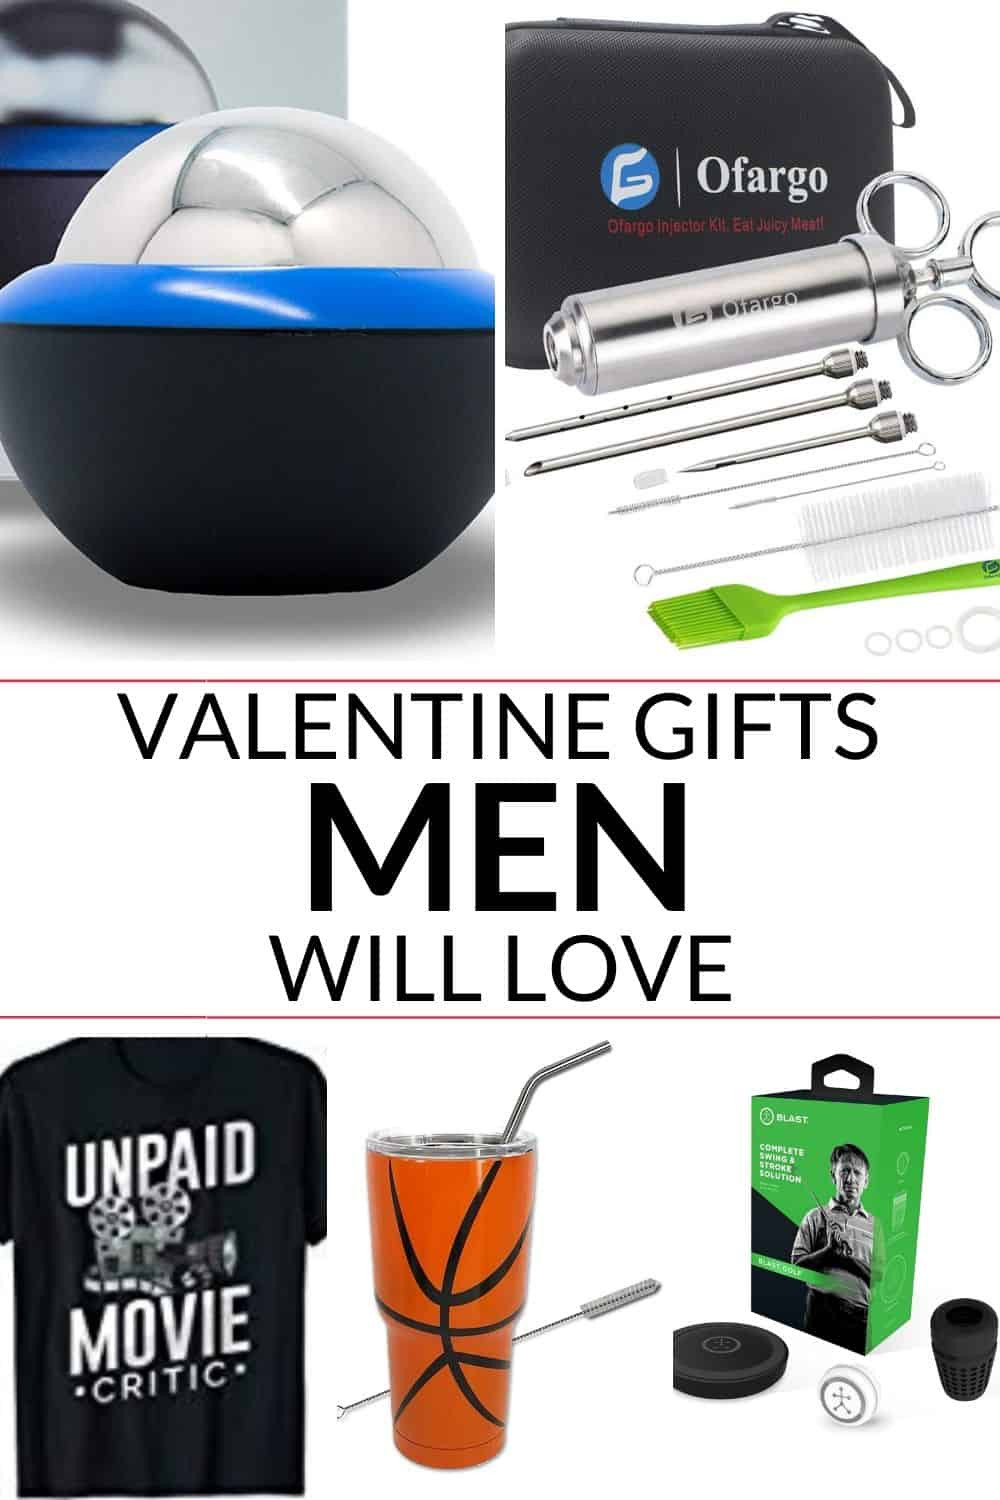 Ideas For Guys Valentines Gift
 Valentine Gift for Husband Great ideas